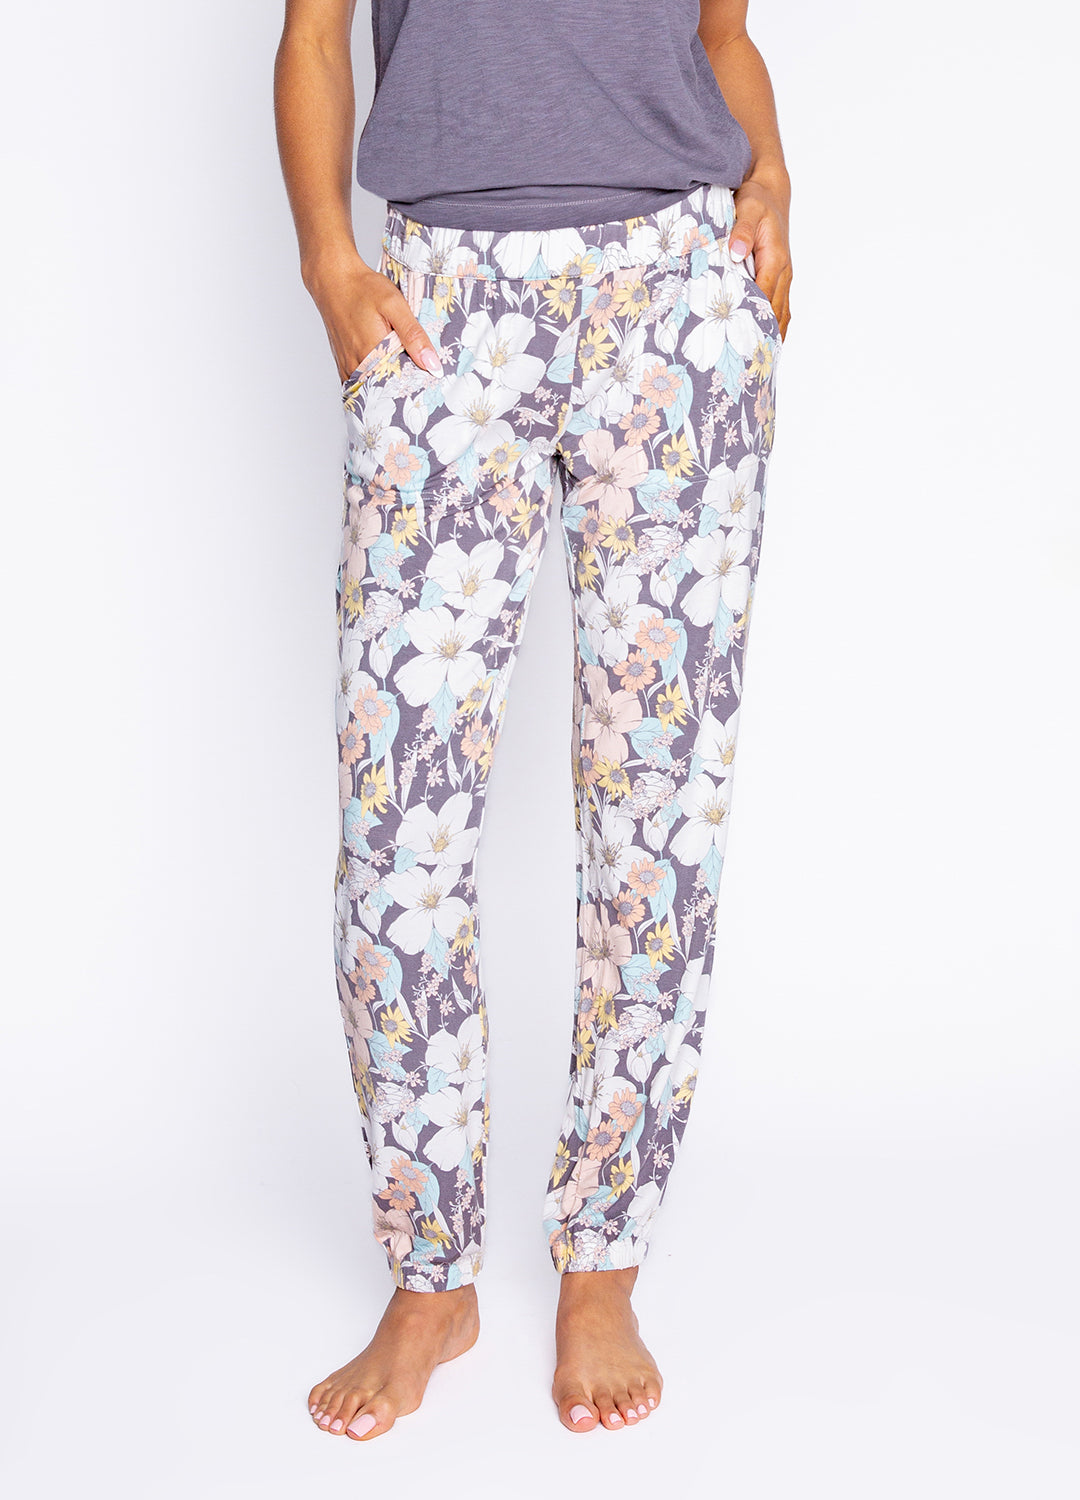 PJ Salvage Banded Lounge Jogger Pant in Pastel Dreams floral print at Inner Beach Co, Toronto, Ontario, Canada